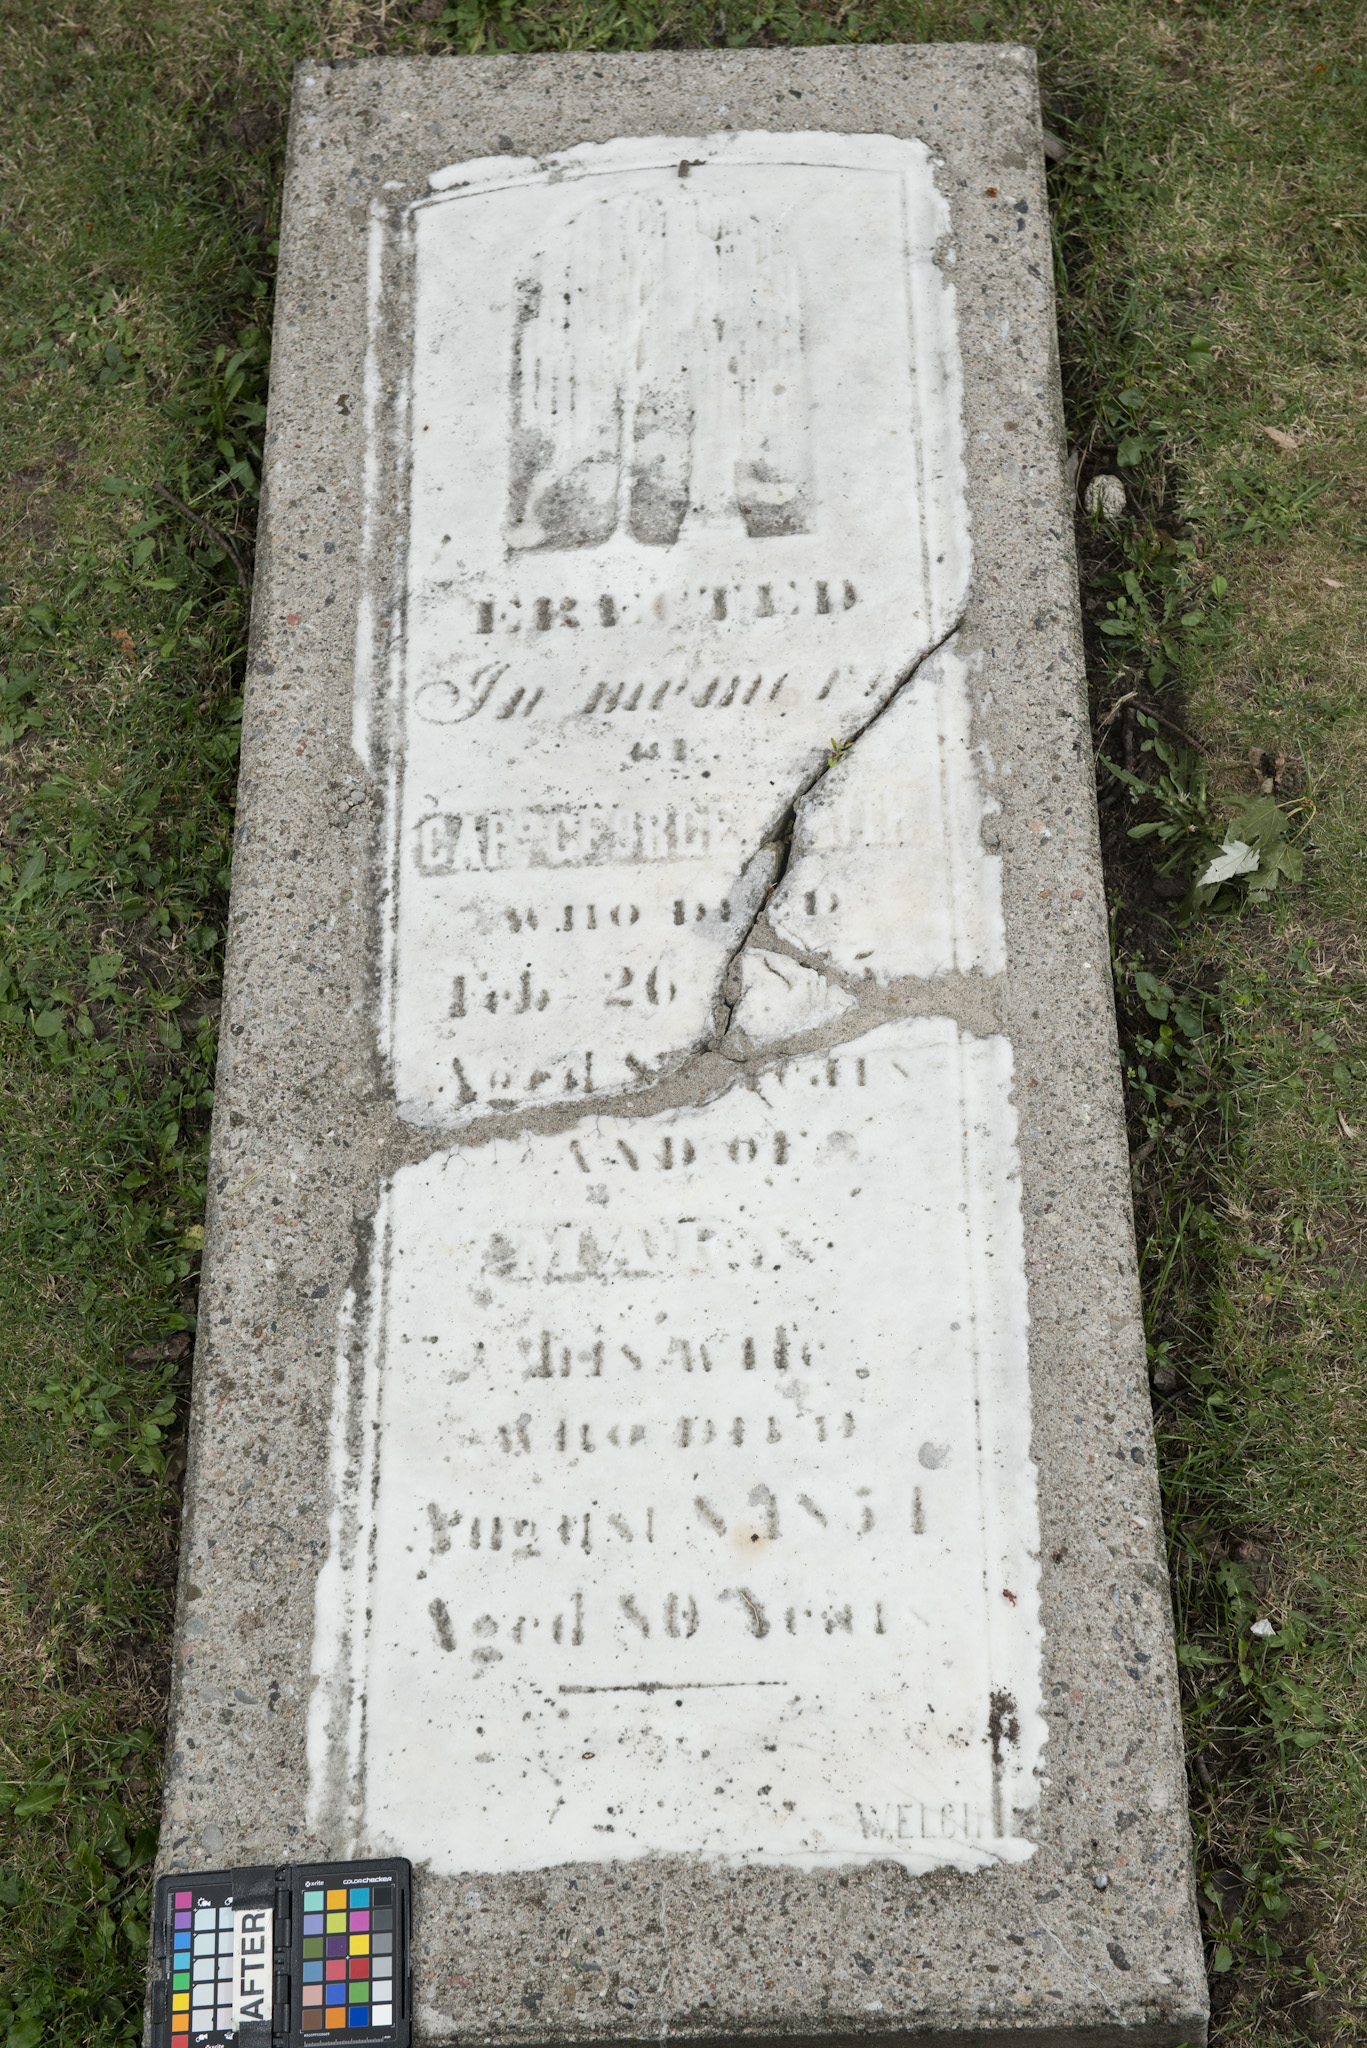 Marker for George and Mary Smith (Alex Gabov)